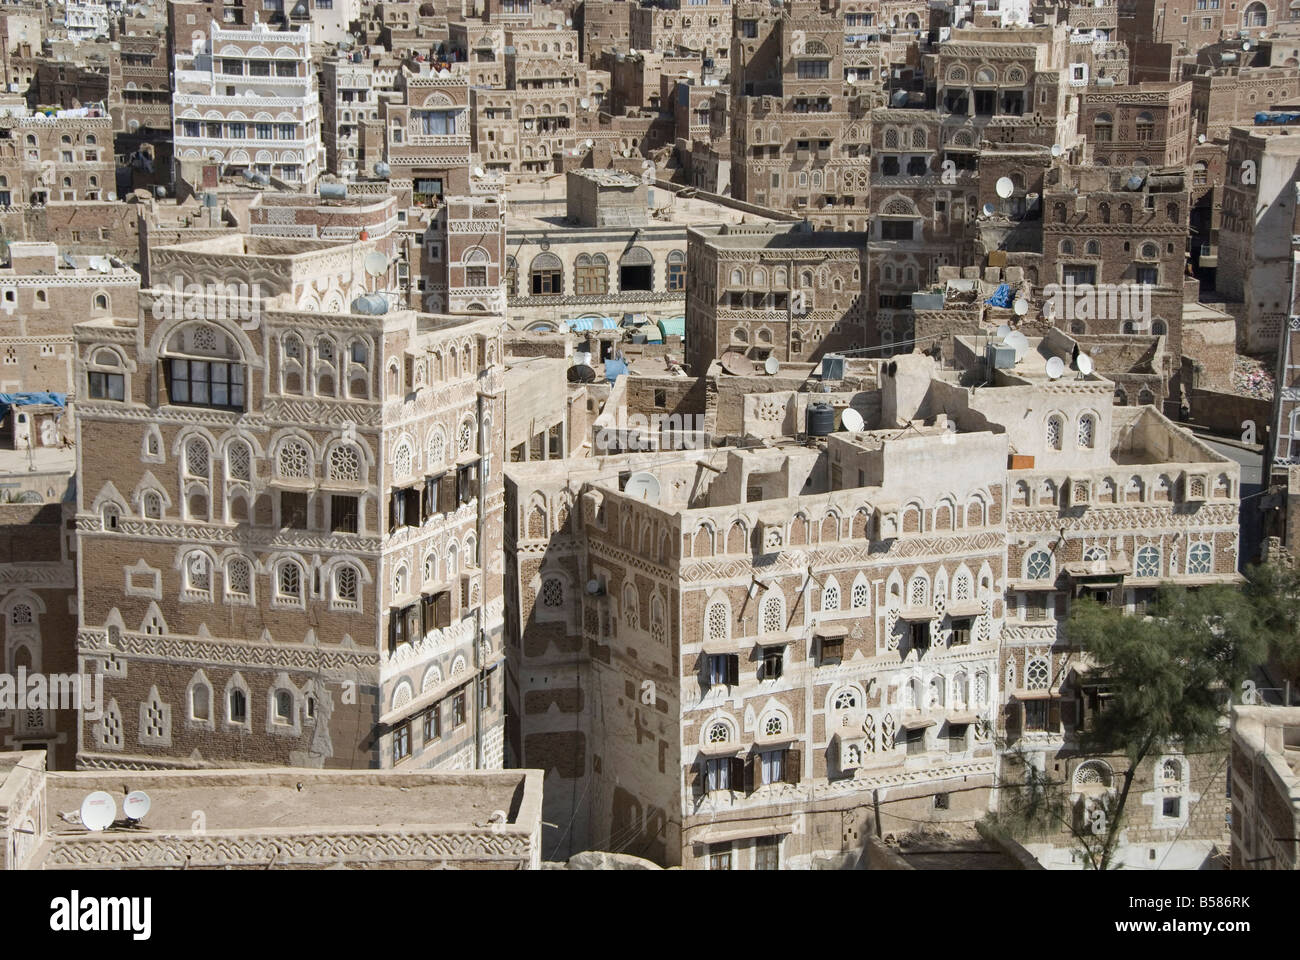 Traditional ornamented brick architecture on tall houses in Old City, Sana'a, UNESCO World Heritage Site, Yemen, Middle East Stock Photo